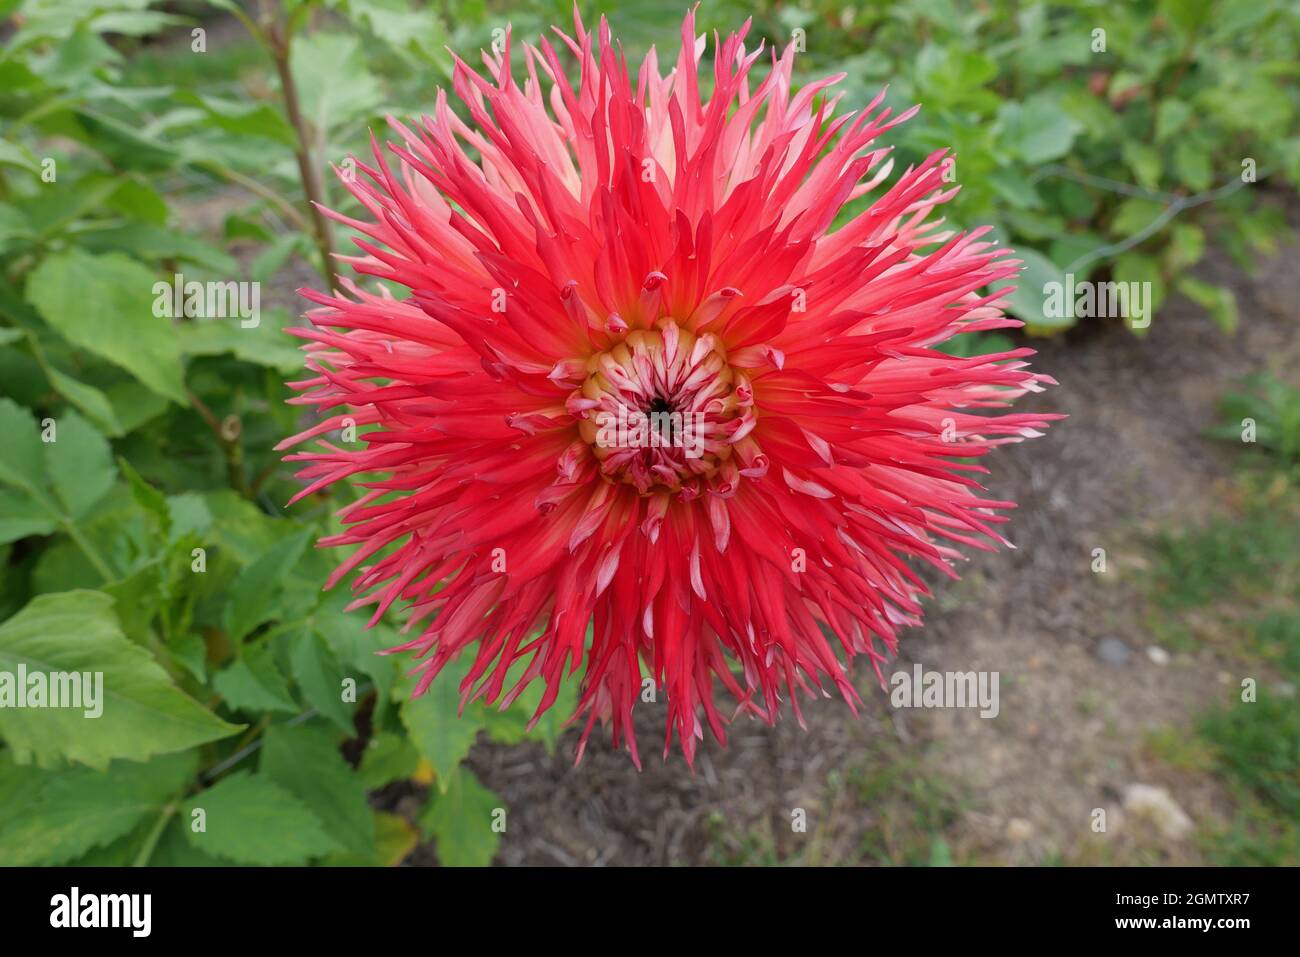 Close up of bright red dahlia flower with shaggy petals Stock Photo